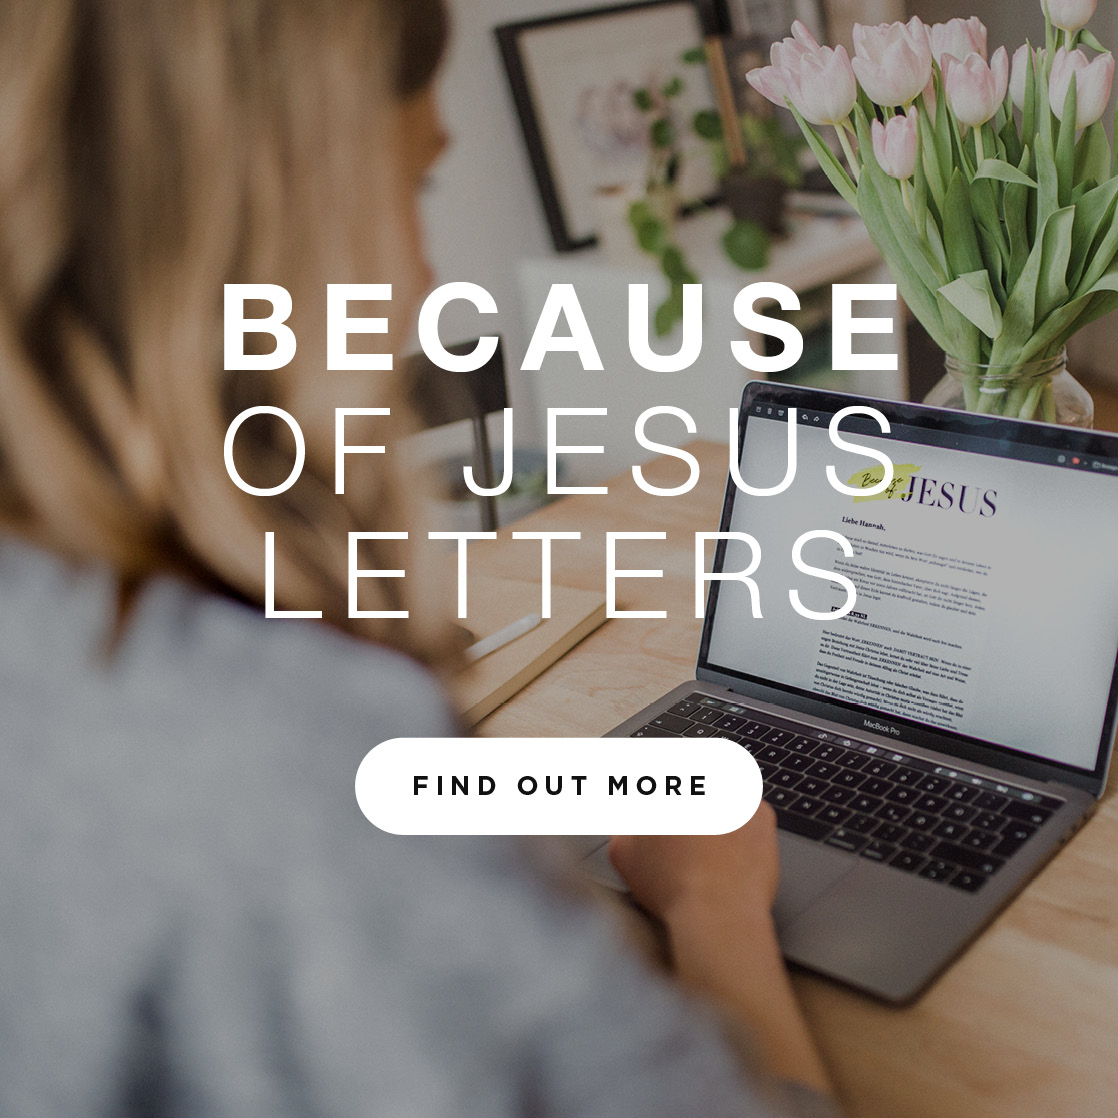 Because of Jesus letters